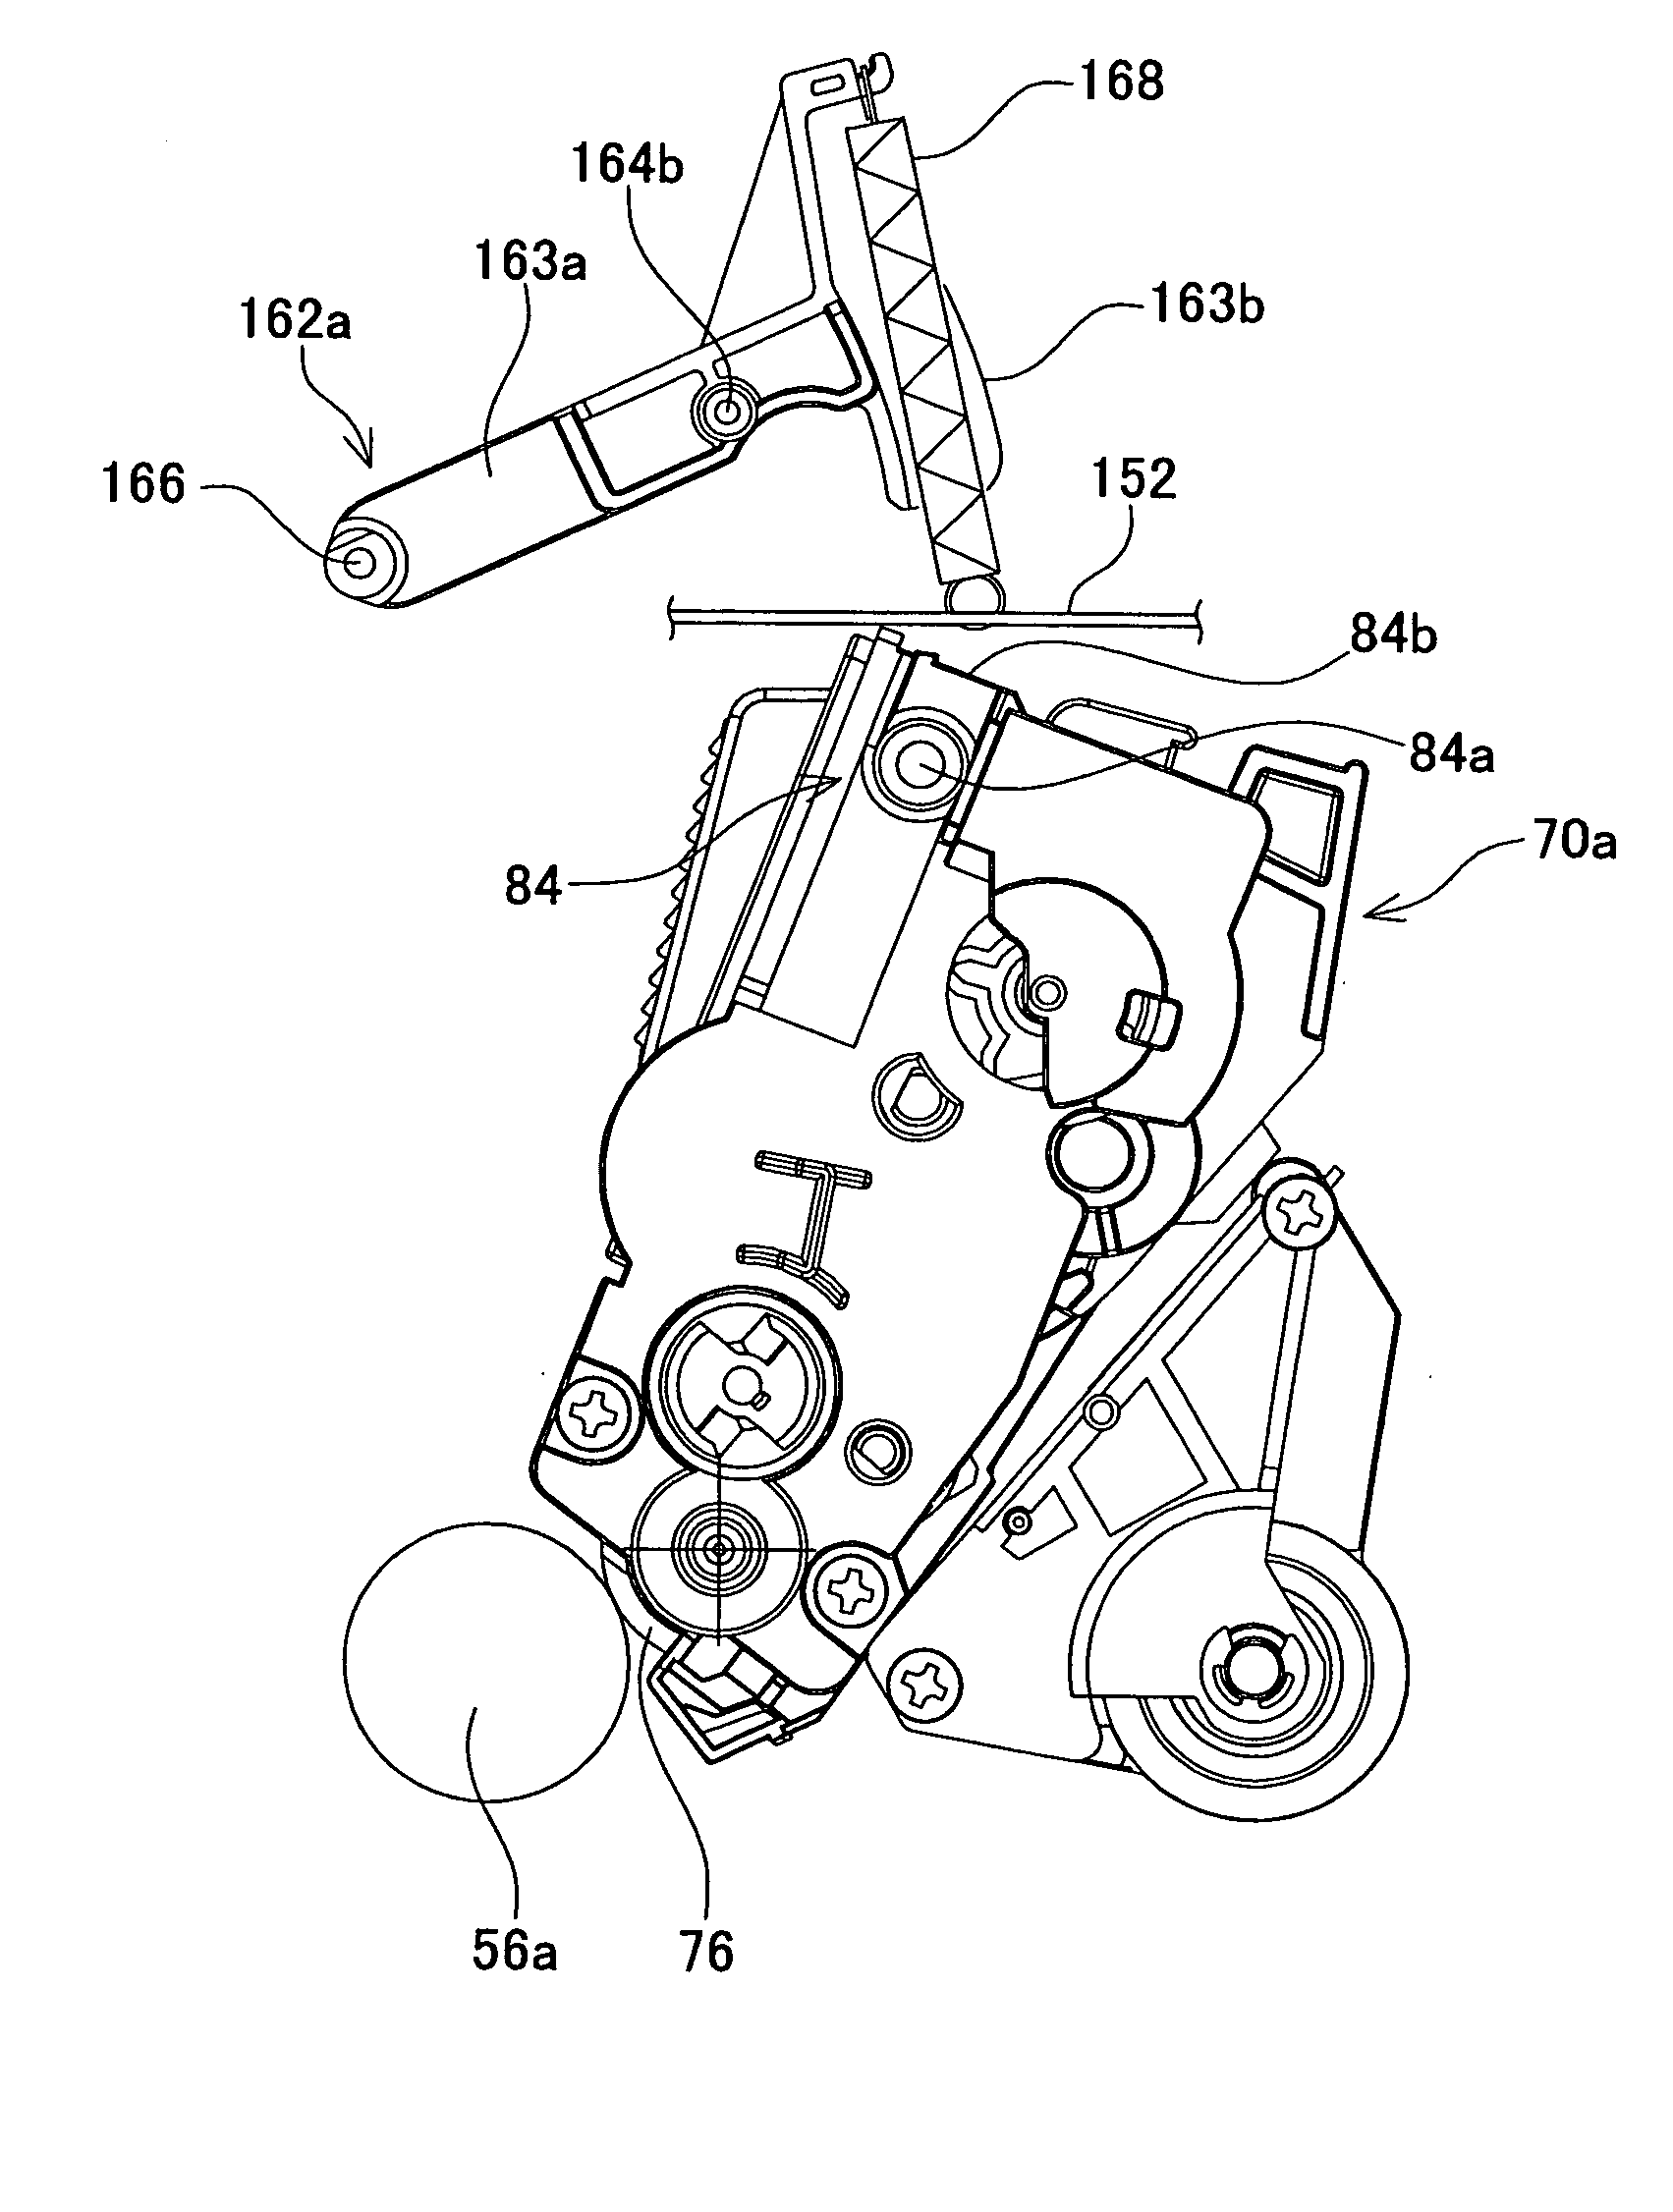 Developing unit and image forming device